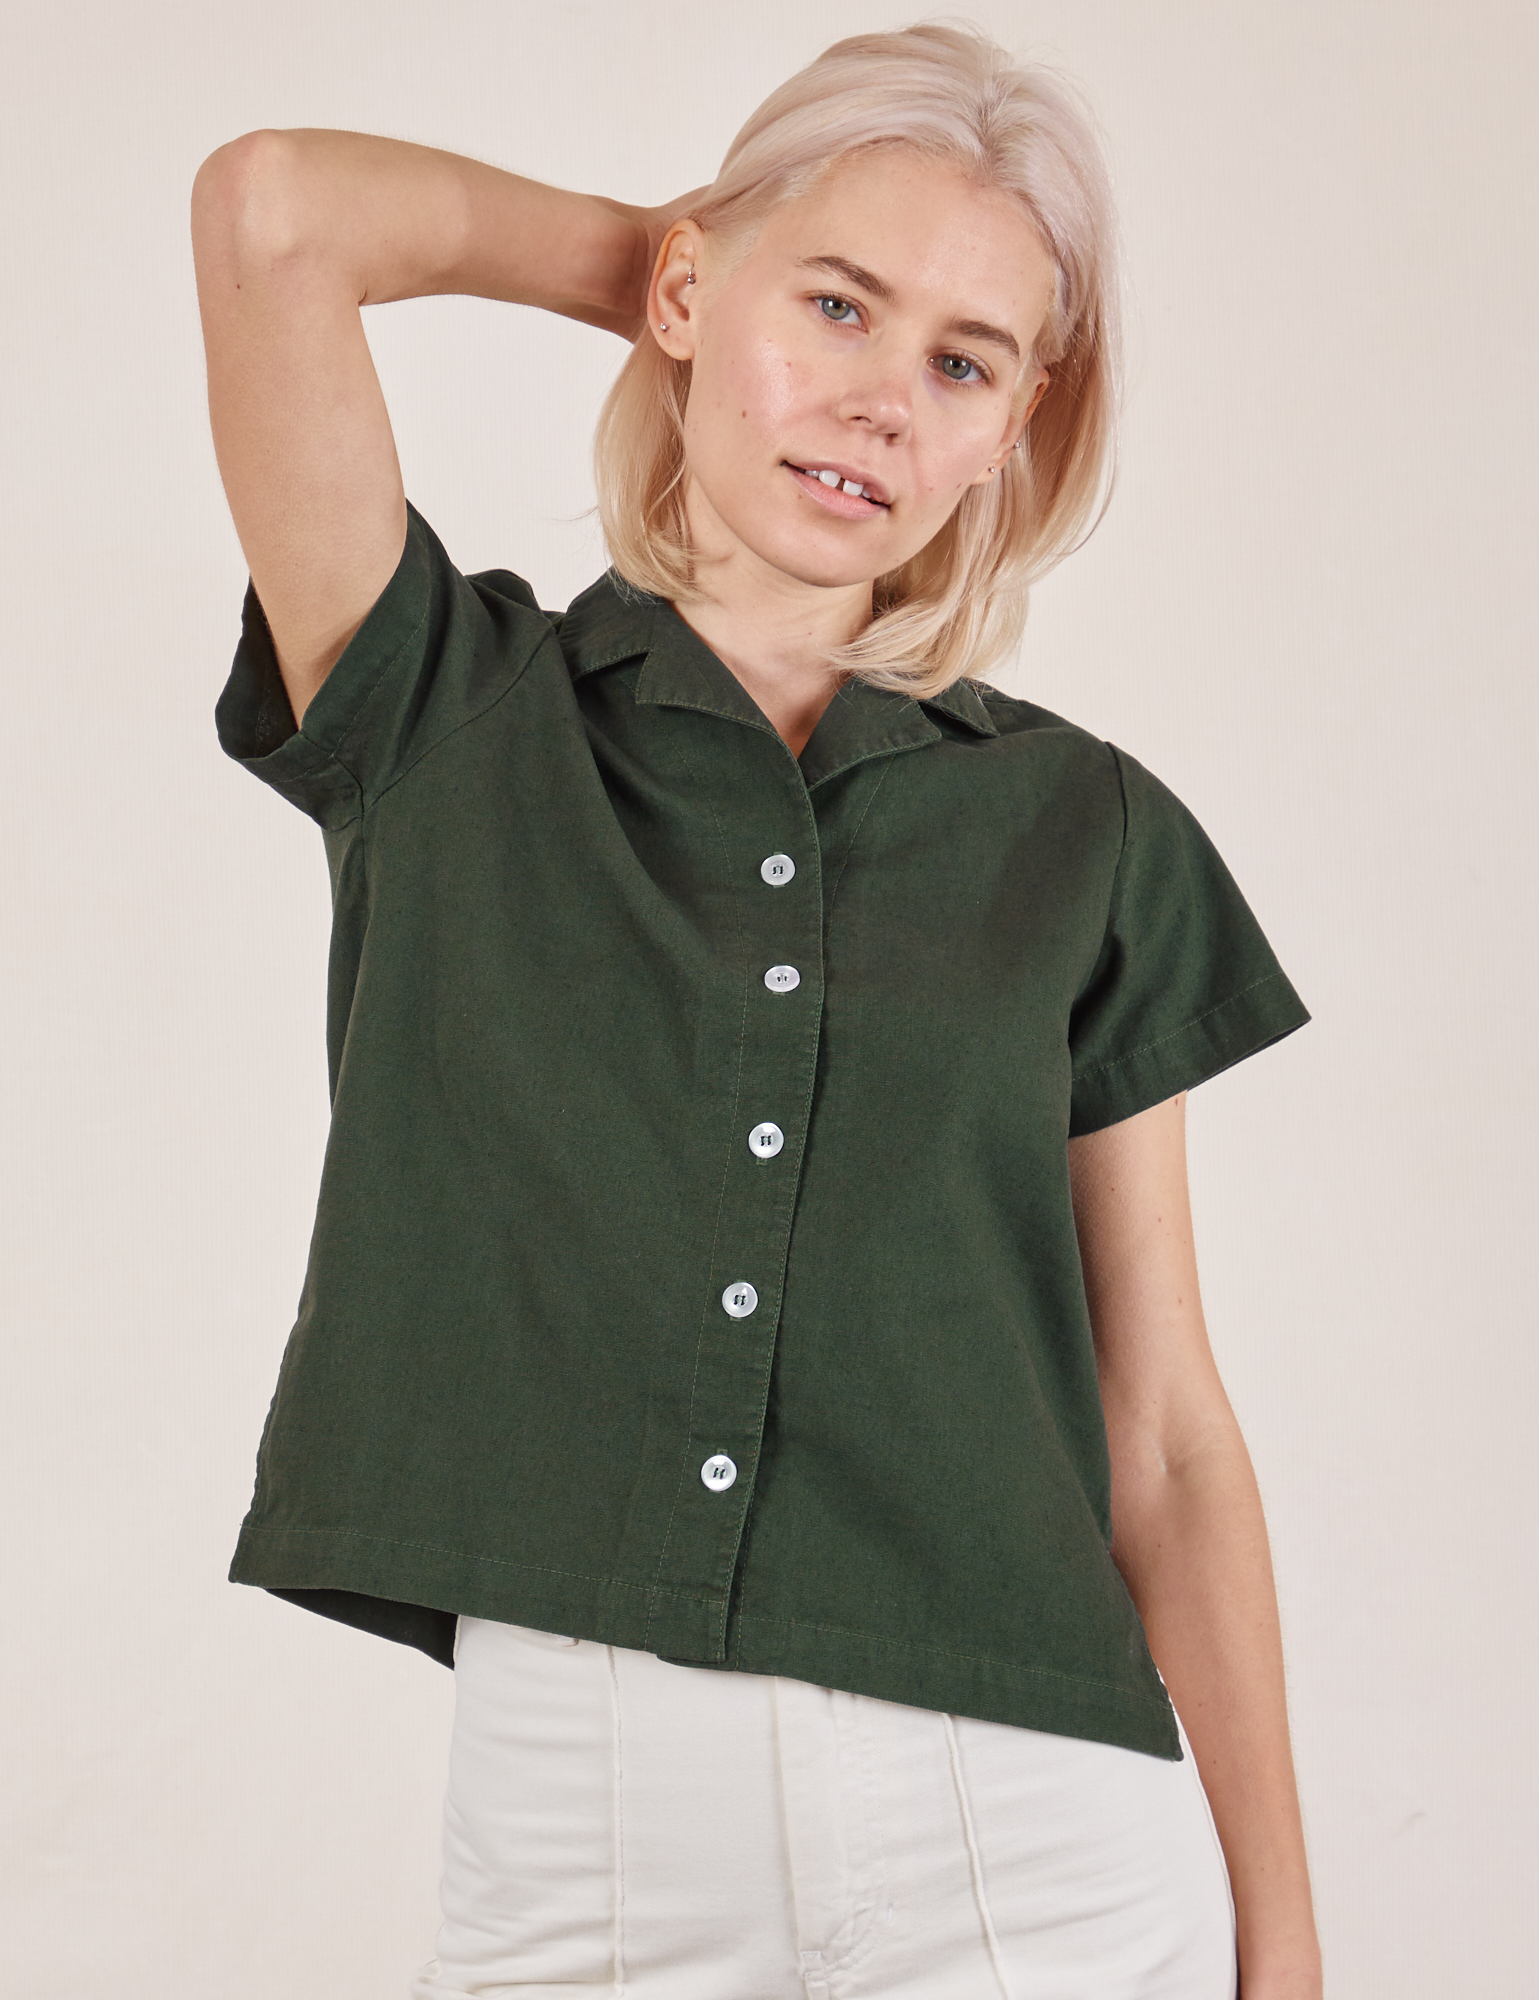 Madeline is 5&#39;9&quot; and wearing P Pantry Button-Up in Swamp Green